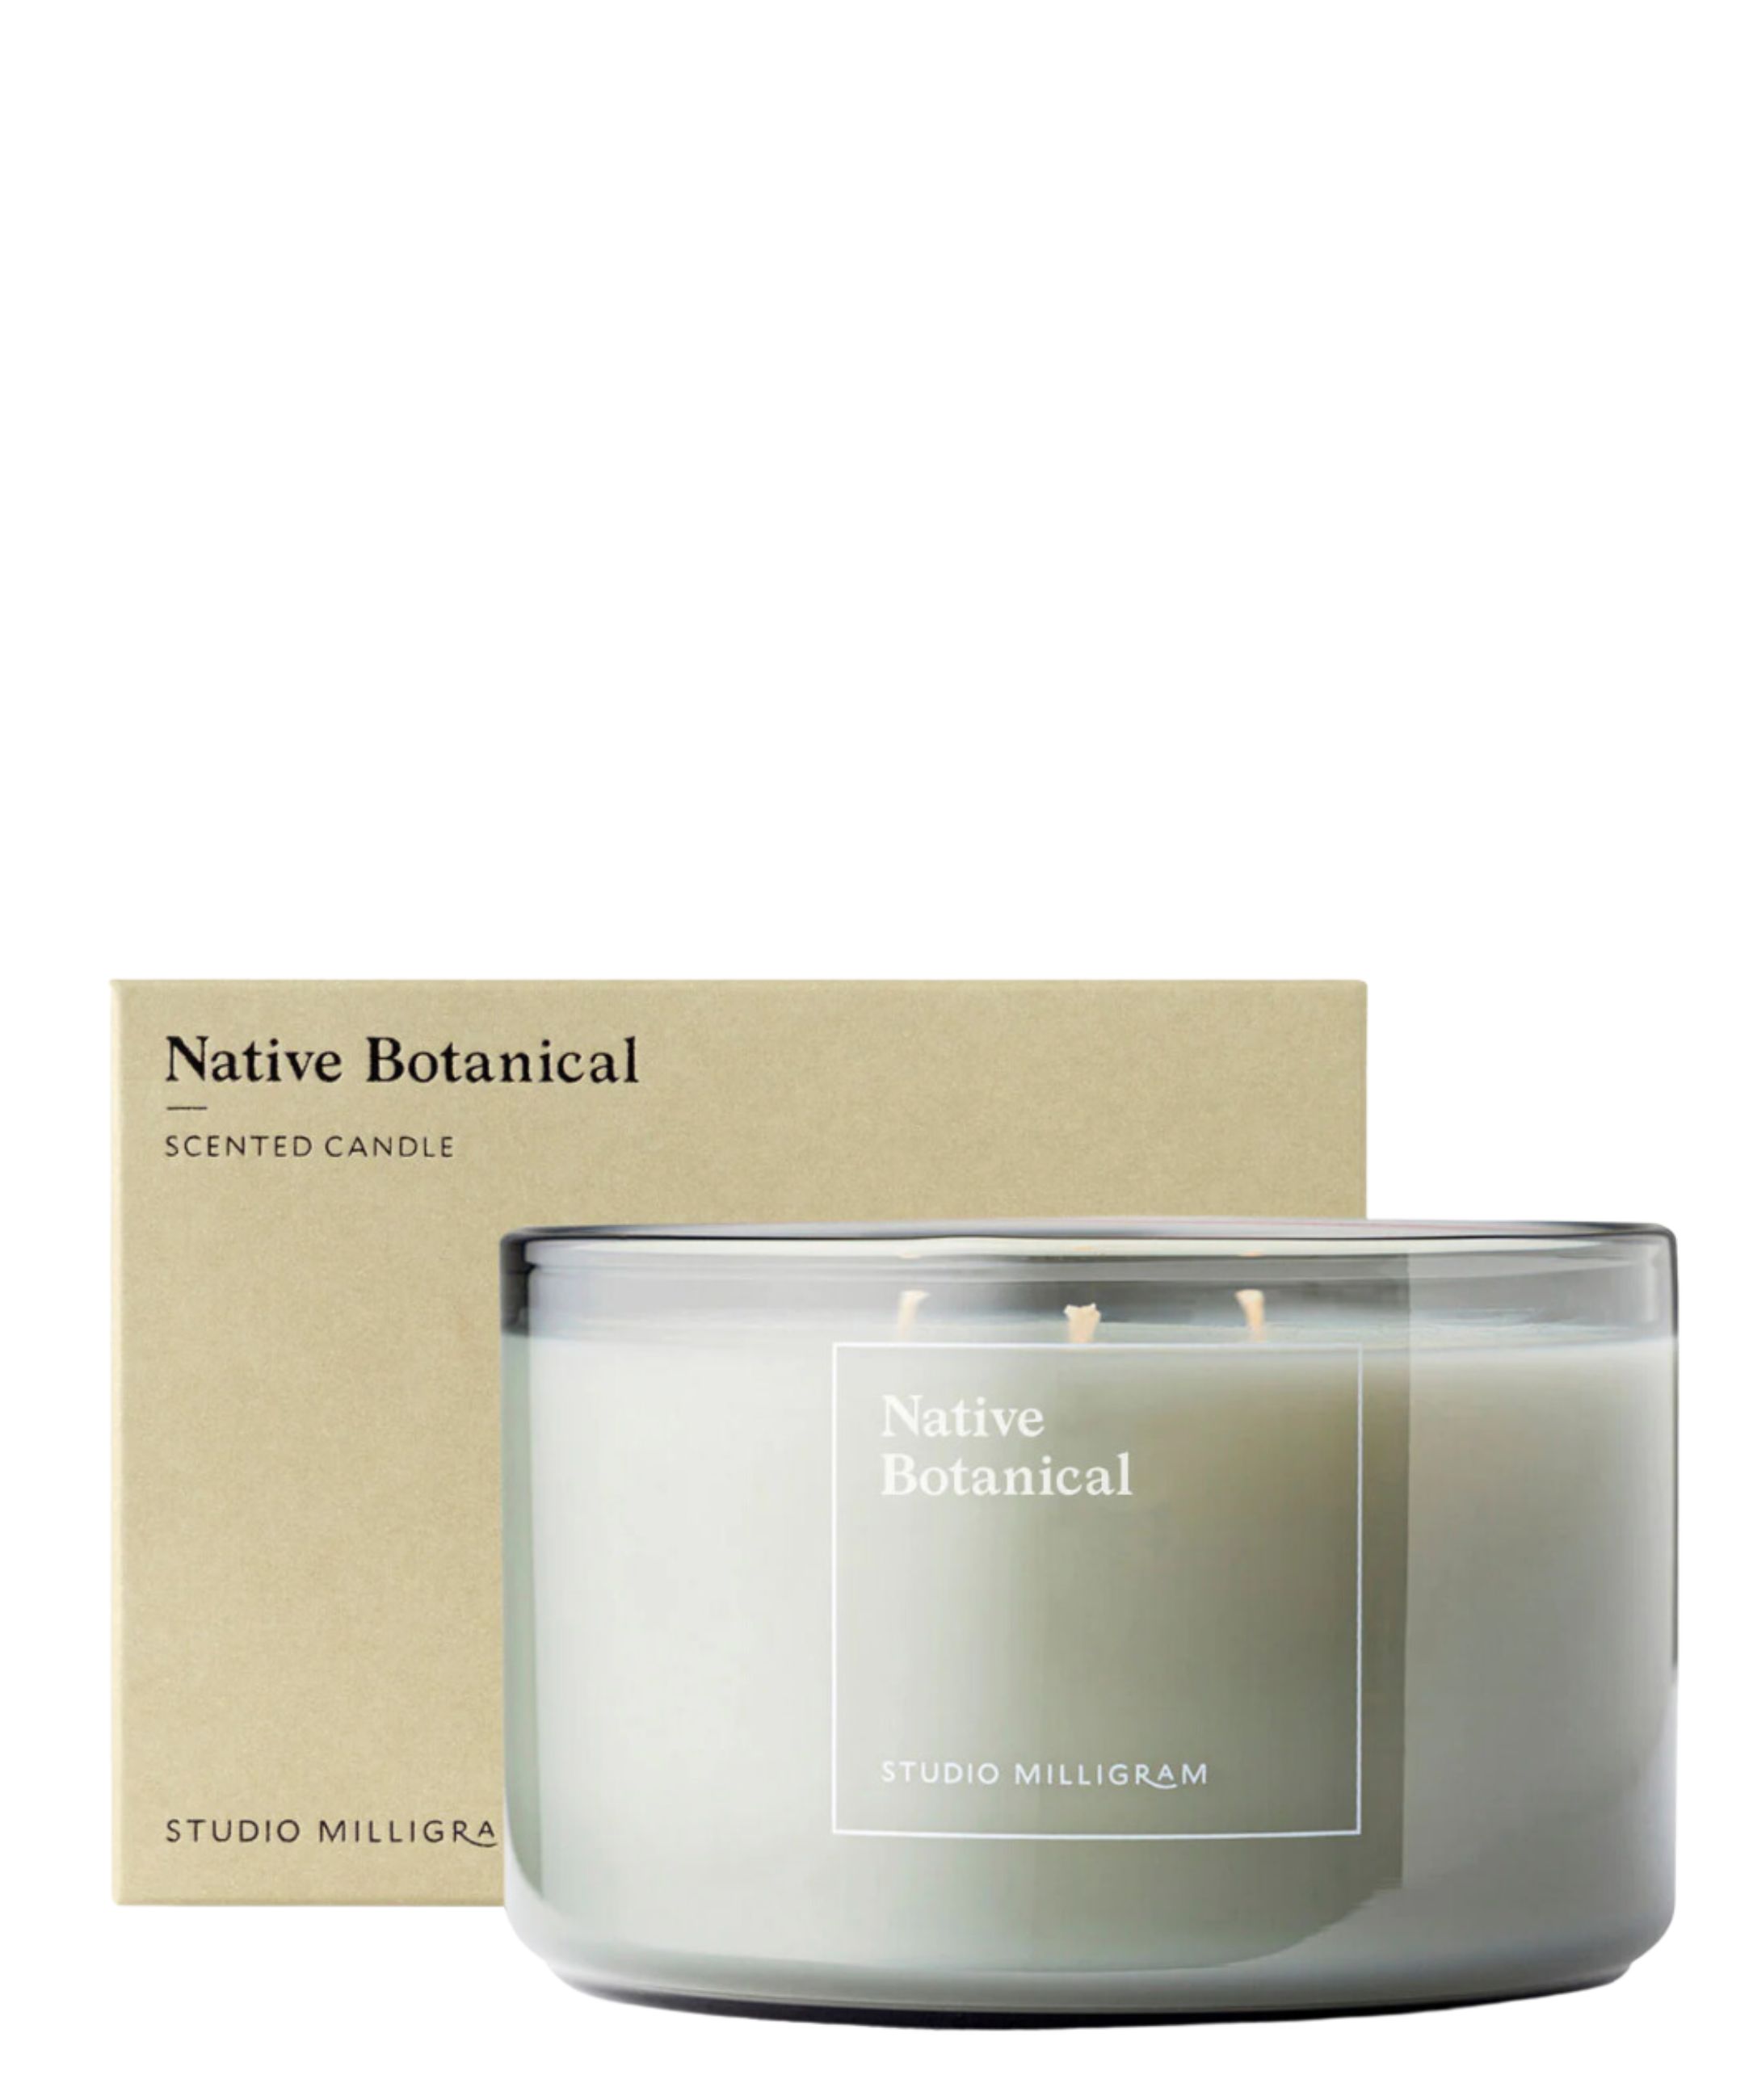 Scented 3 Wick Candle - Native Botanical